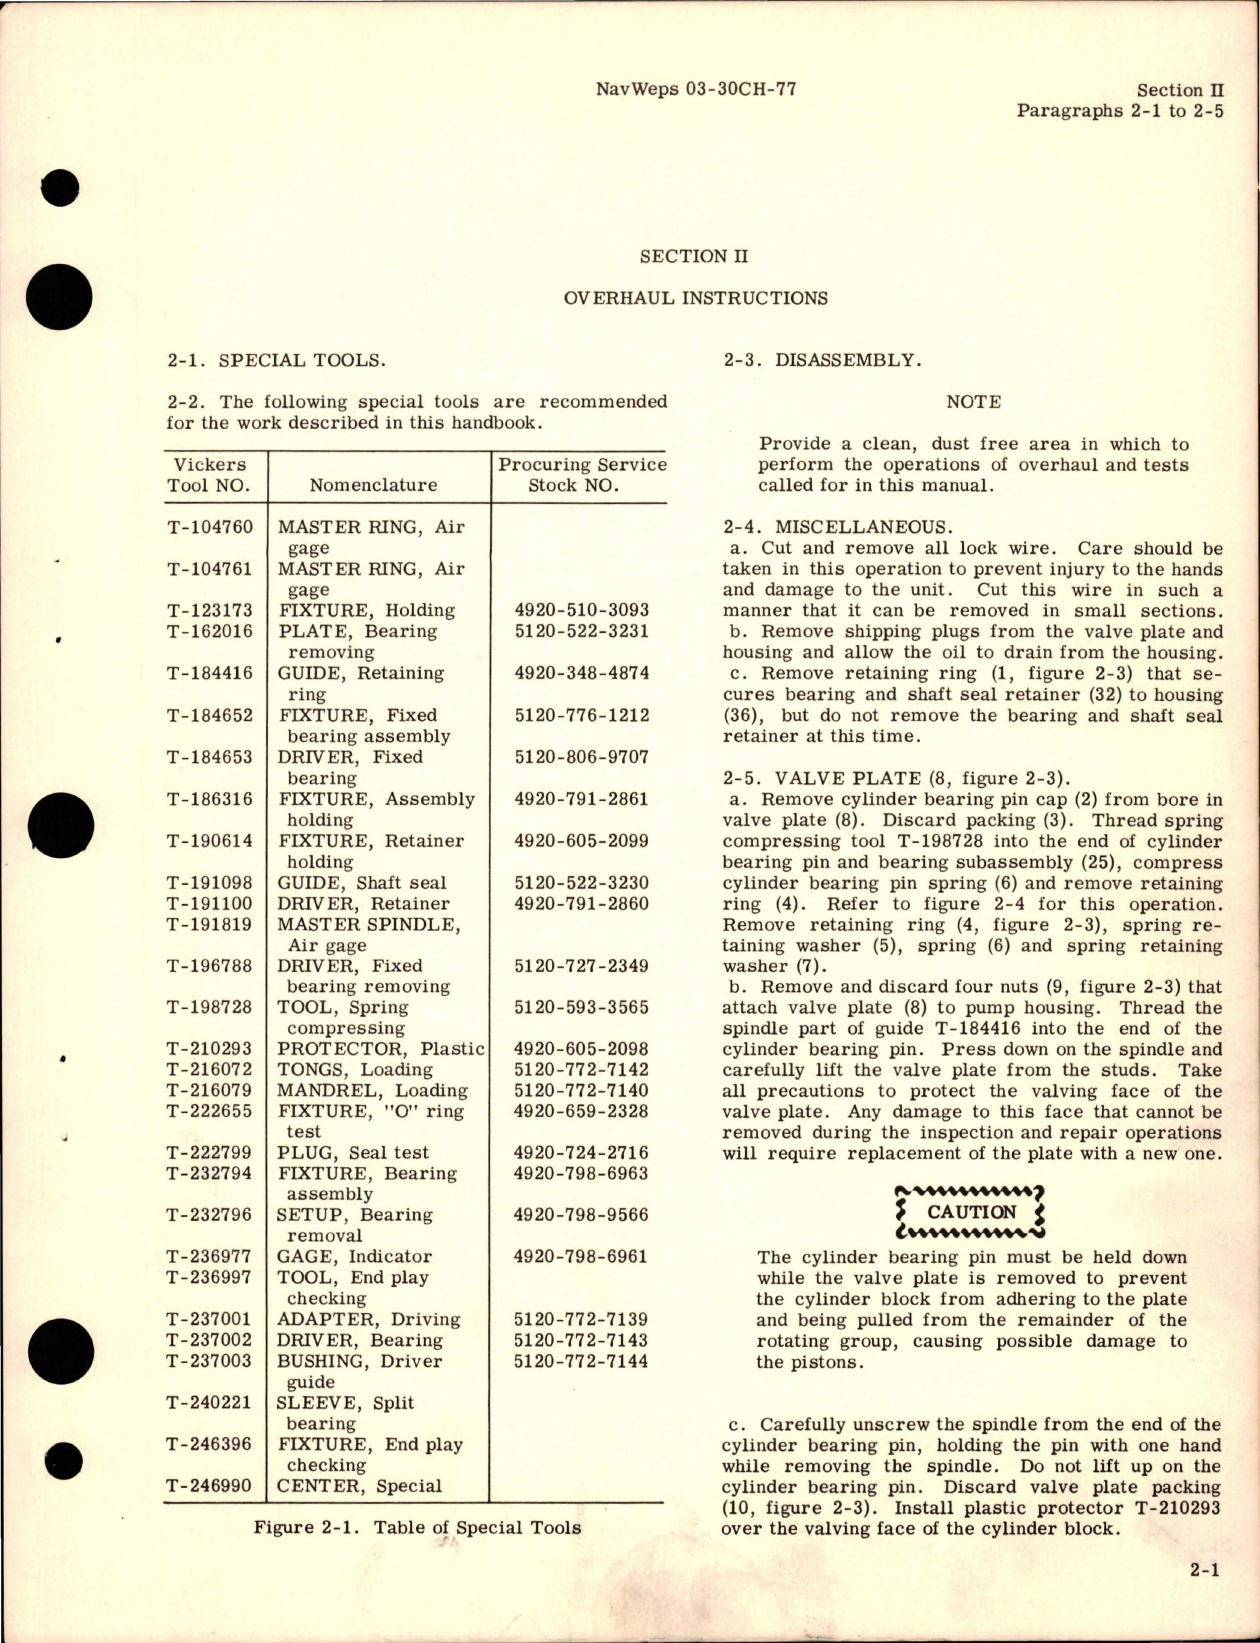 Sample page 7 from AirCorps Library document: Overhaul Instructions for Hydraulic Motor Assembly